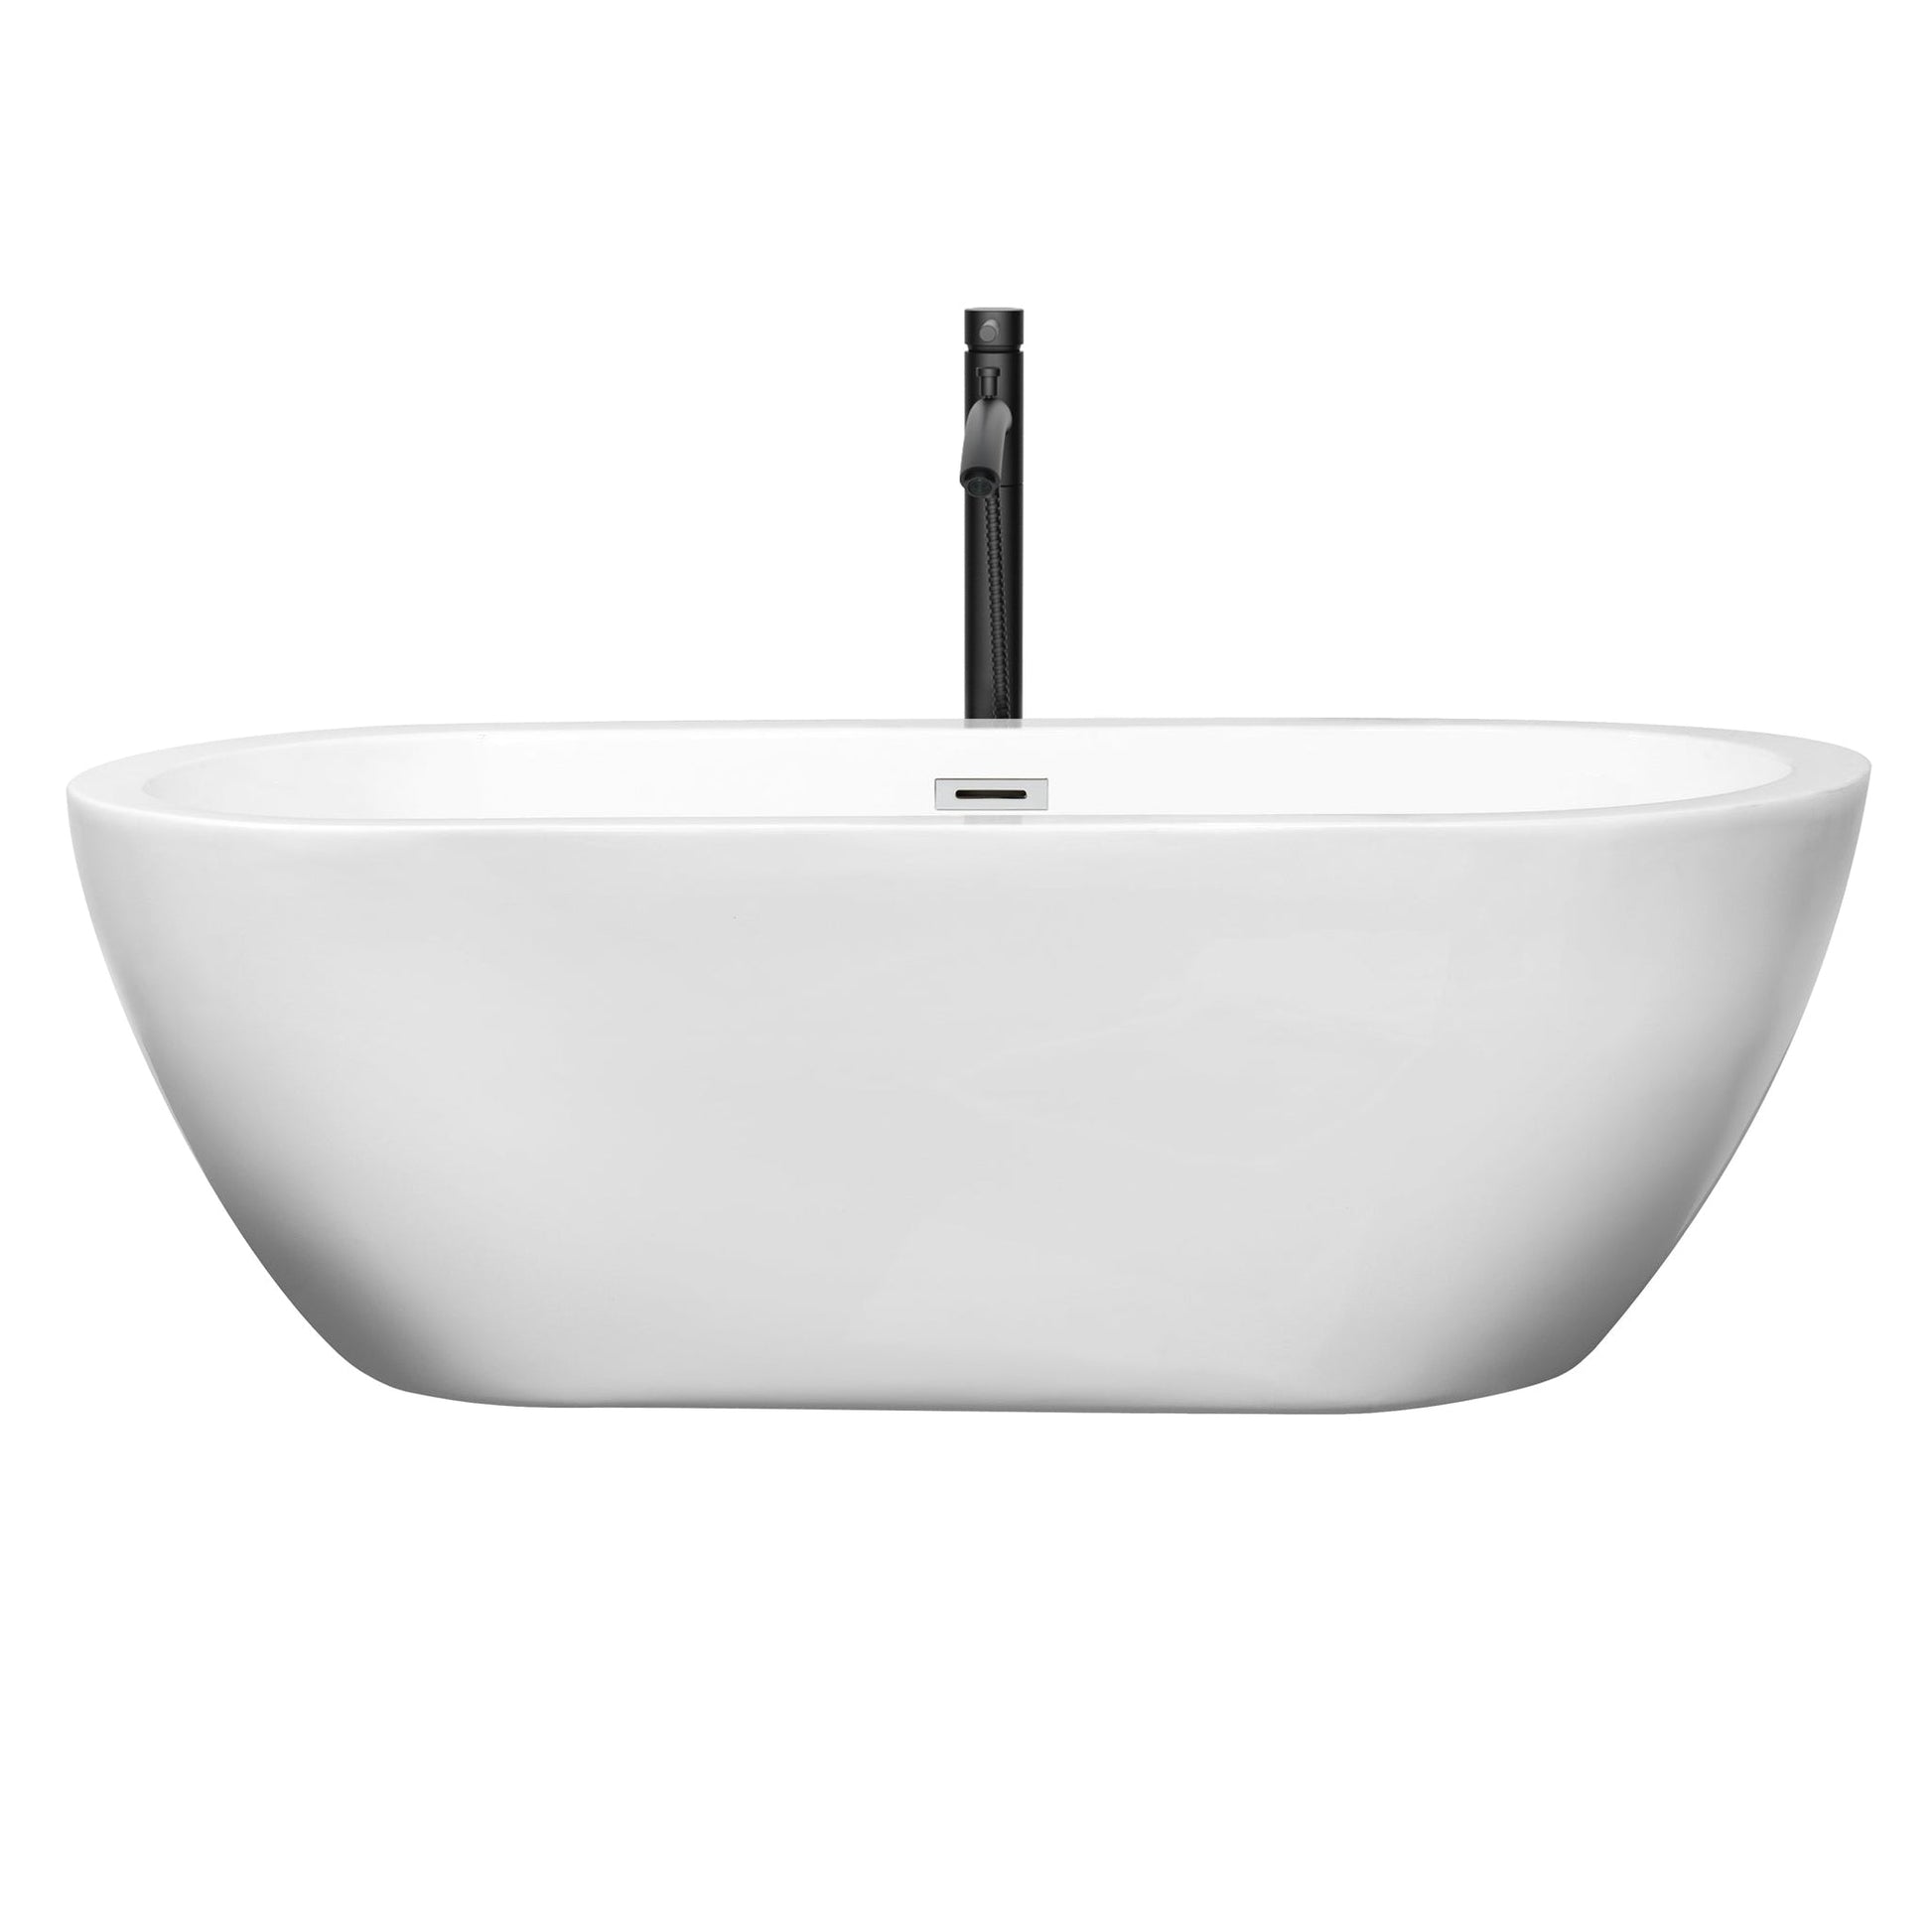 Wyndham Collection Soho 68" Freestanding Bathtub in White With Polished Chrome Trim and Floor Mounted Faucet in Matte Black